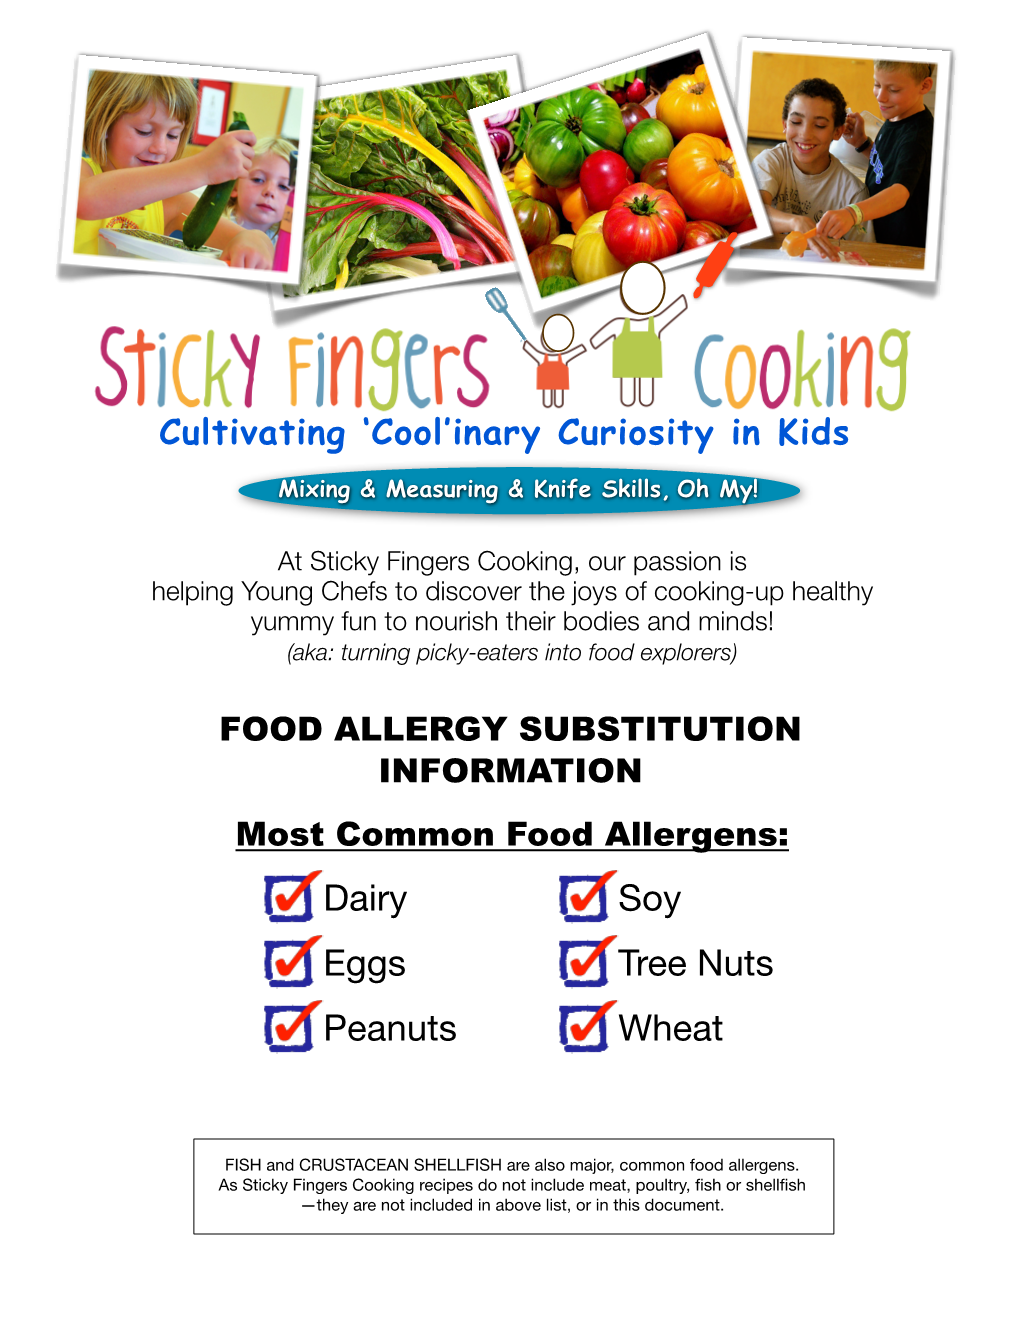 FOOD ALLERGY SUBSTITUTION INFORMATION Most Common Food Allergens: Dairy Soy Eggs Tree Nuts Peanuts Wheat